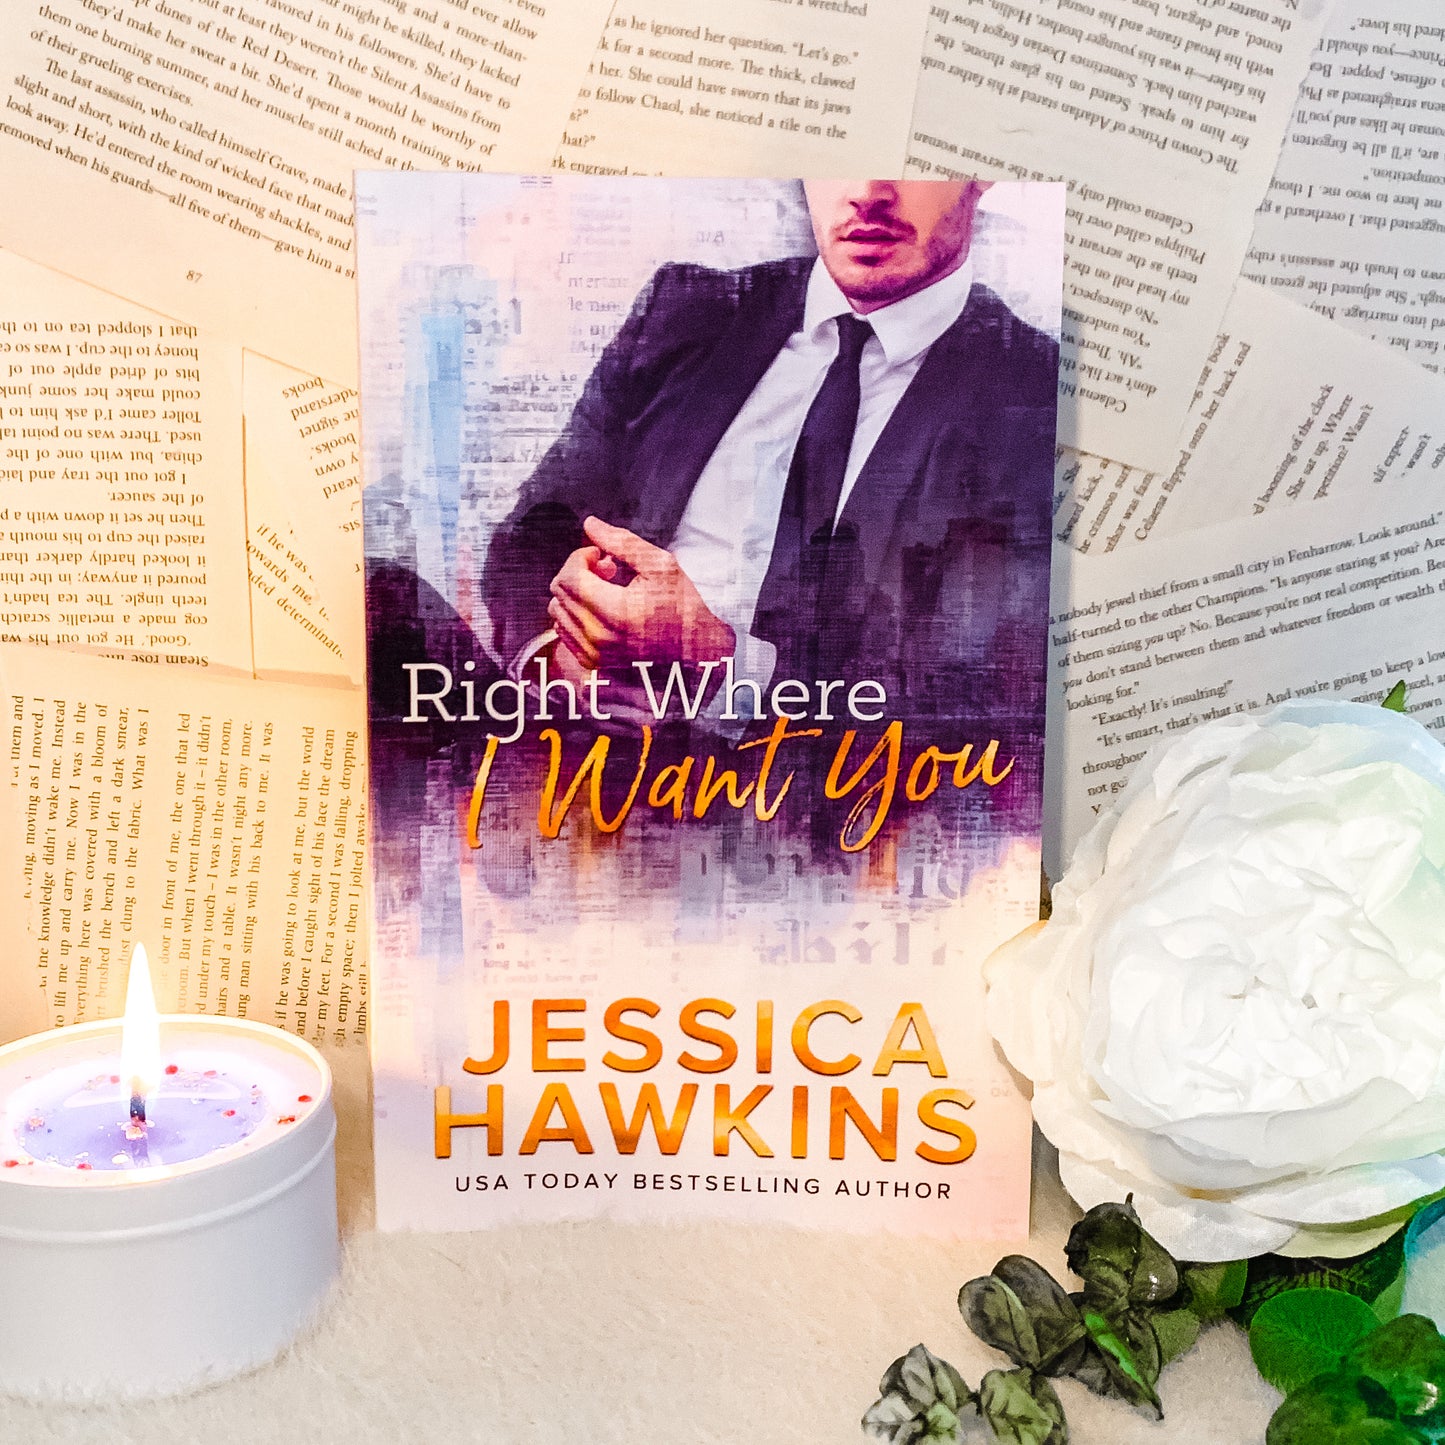 Right Where I Want You by Jessica Hawkins